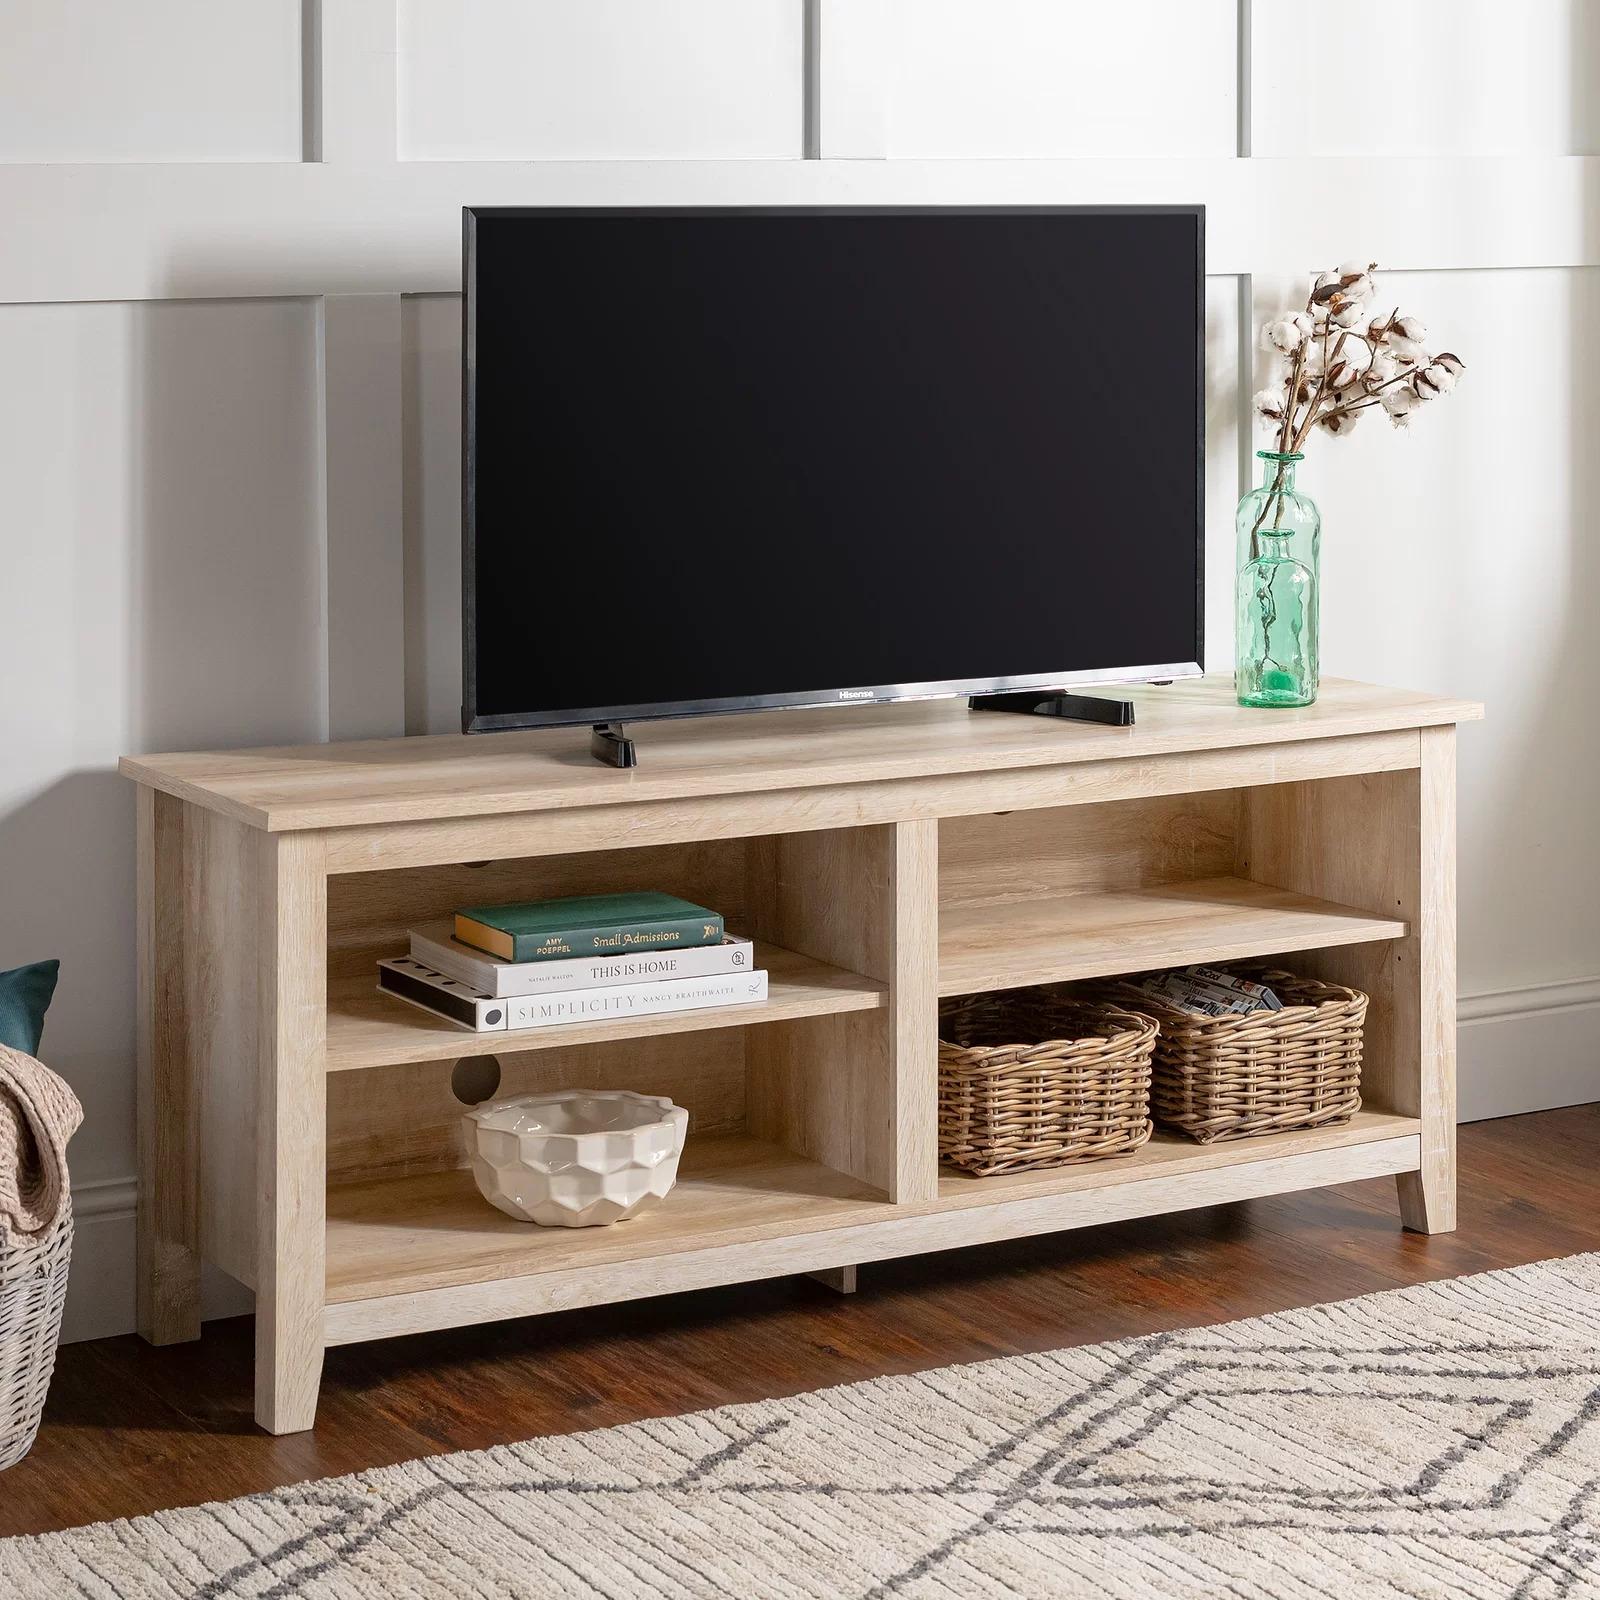 Here's an amazing Black Friday deal you don't want to miss!  871cc354 sunbury tv stand for tvs up to 6